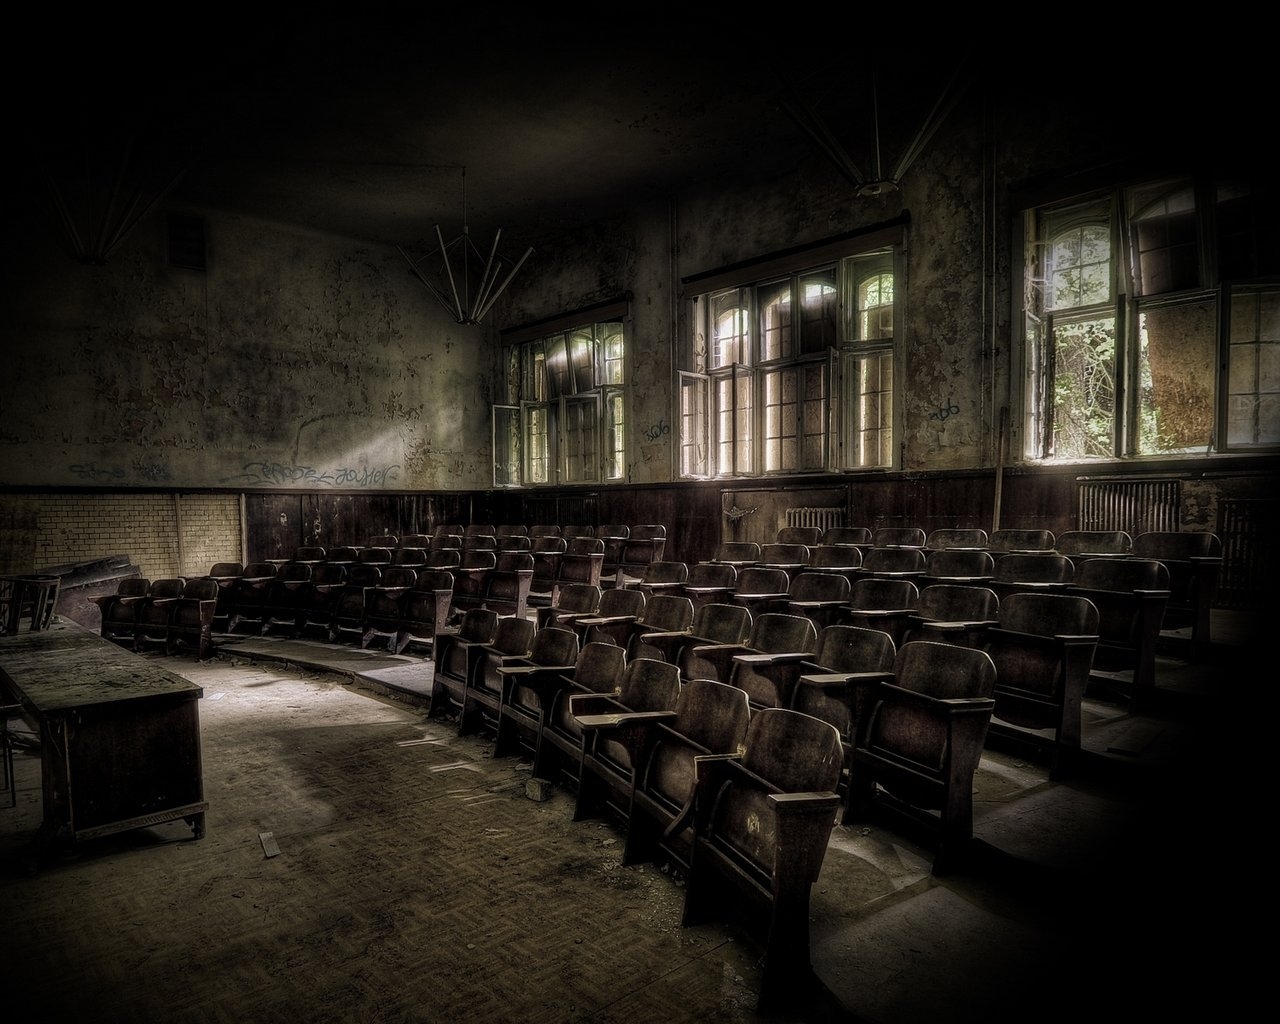 Abandoned classroom for 1280 x 1024 resolution